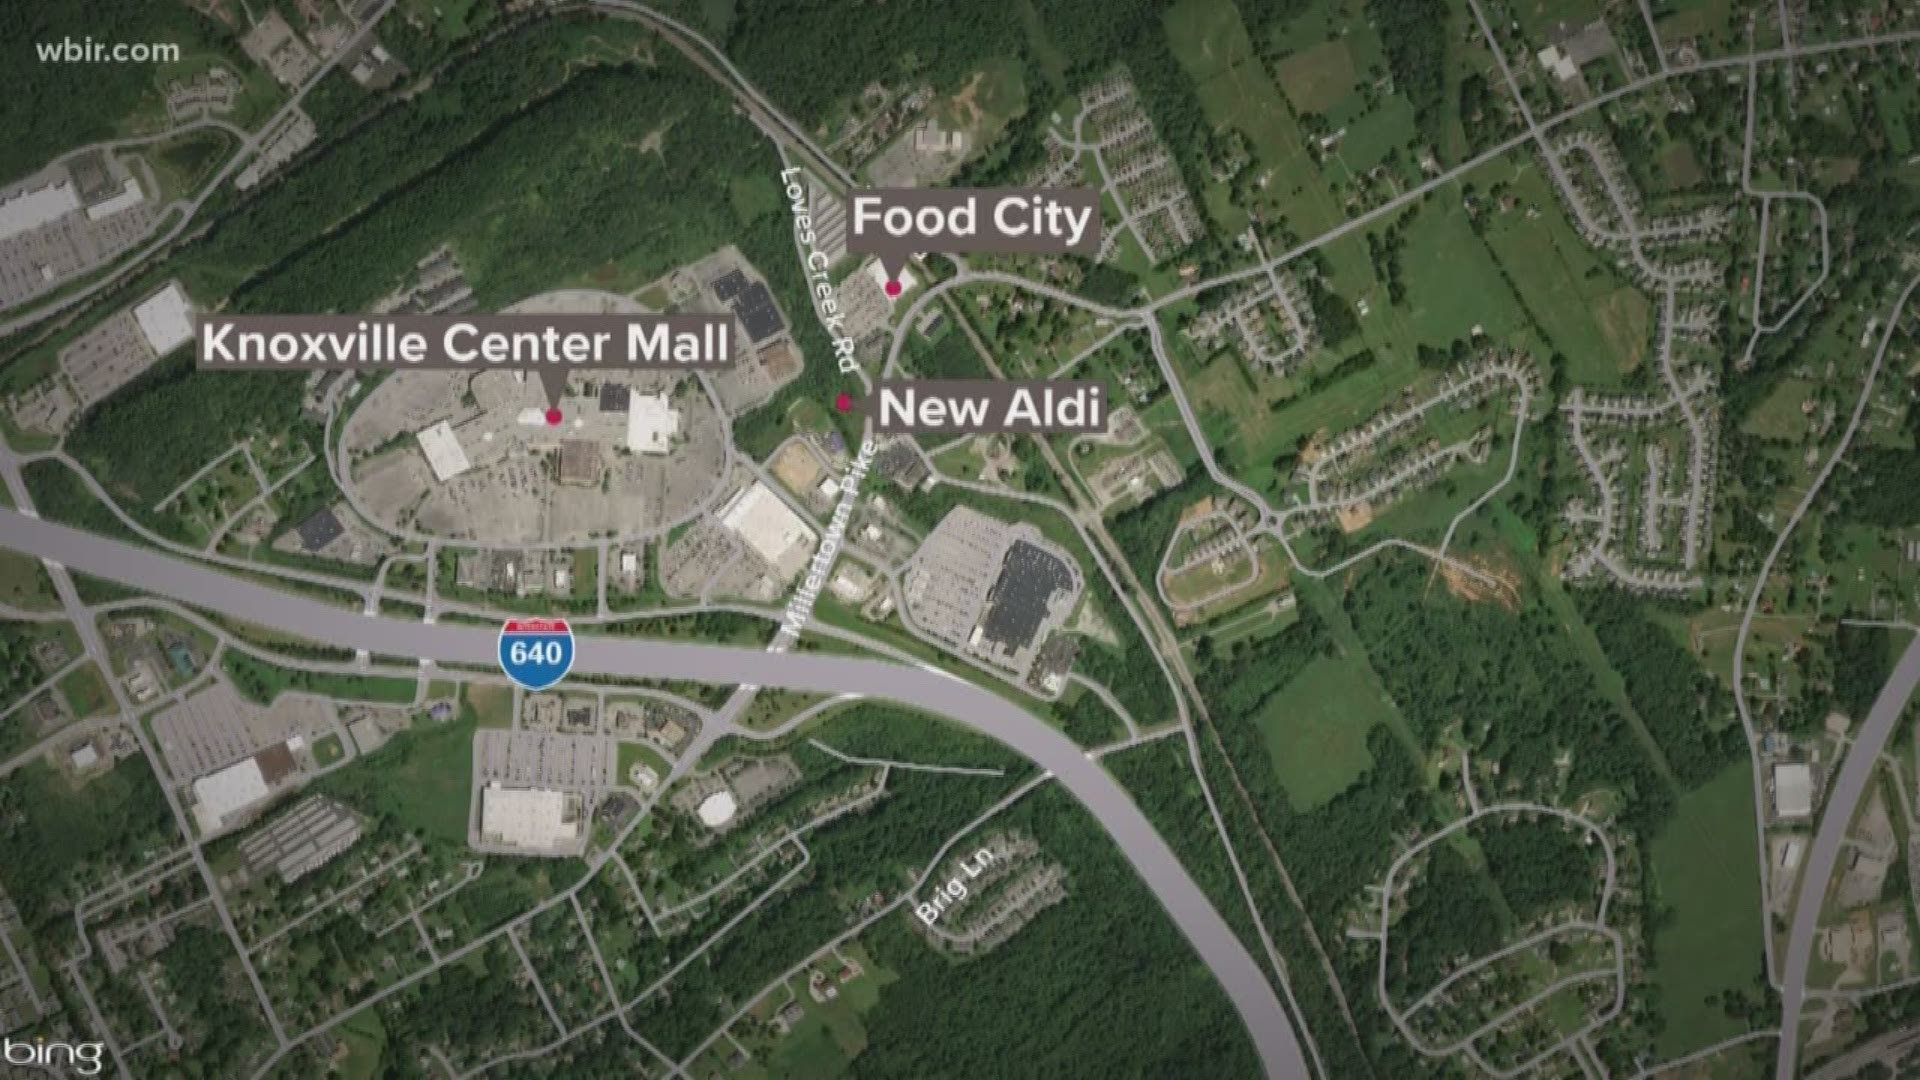 An Aldi will soon be going in across from the Food City at the intersection of Loves Creek and Millertown Pike.